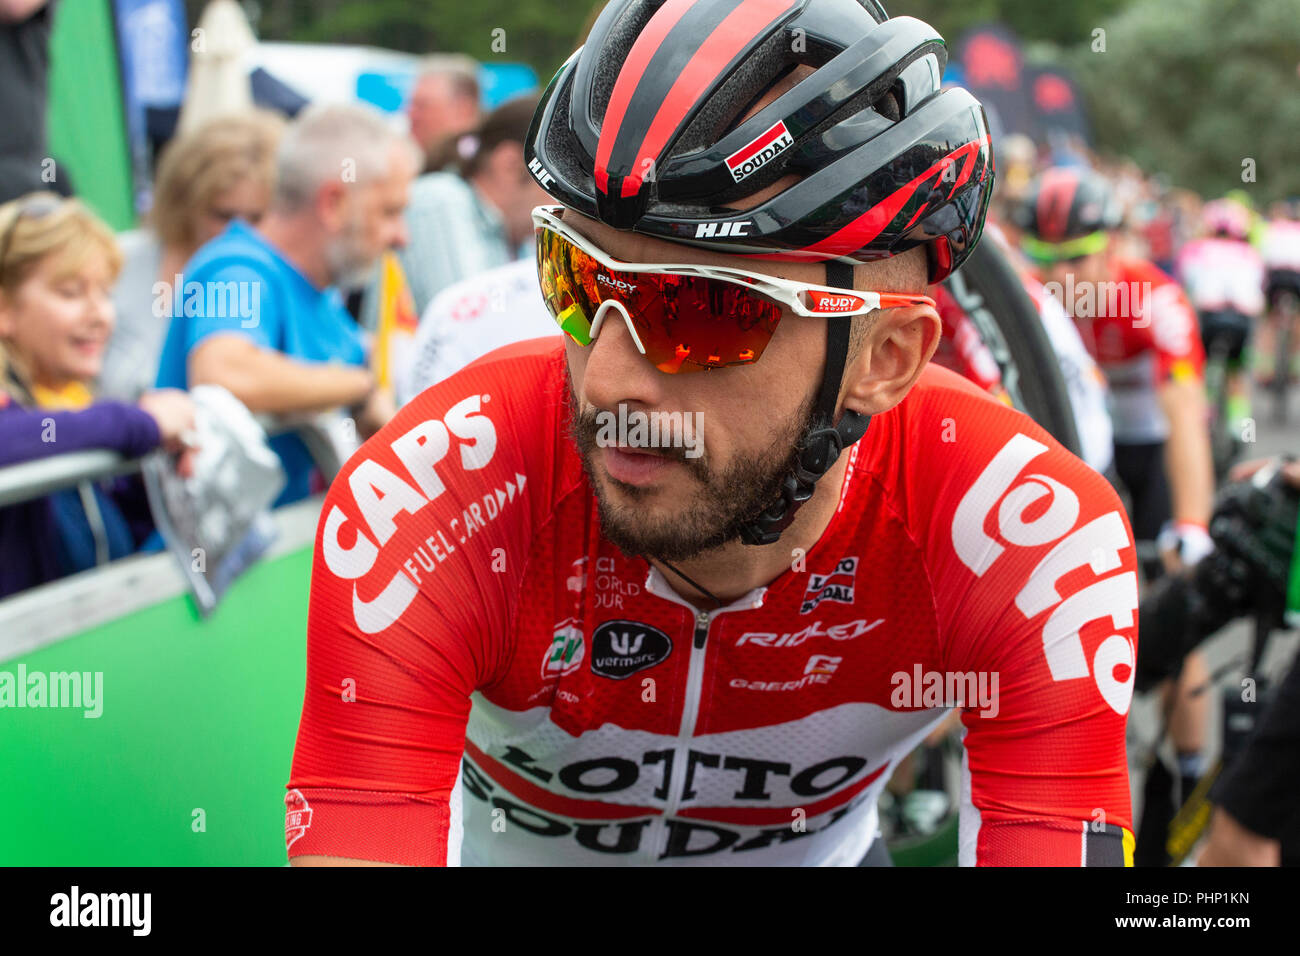 Professional cyclist Jelle Vanendert (Belgium) of the LOTTO SOUDAL team ahead of Stage 1 of the Tour of Britain cycling race starting at Pembrey Country Park. Stock Photo